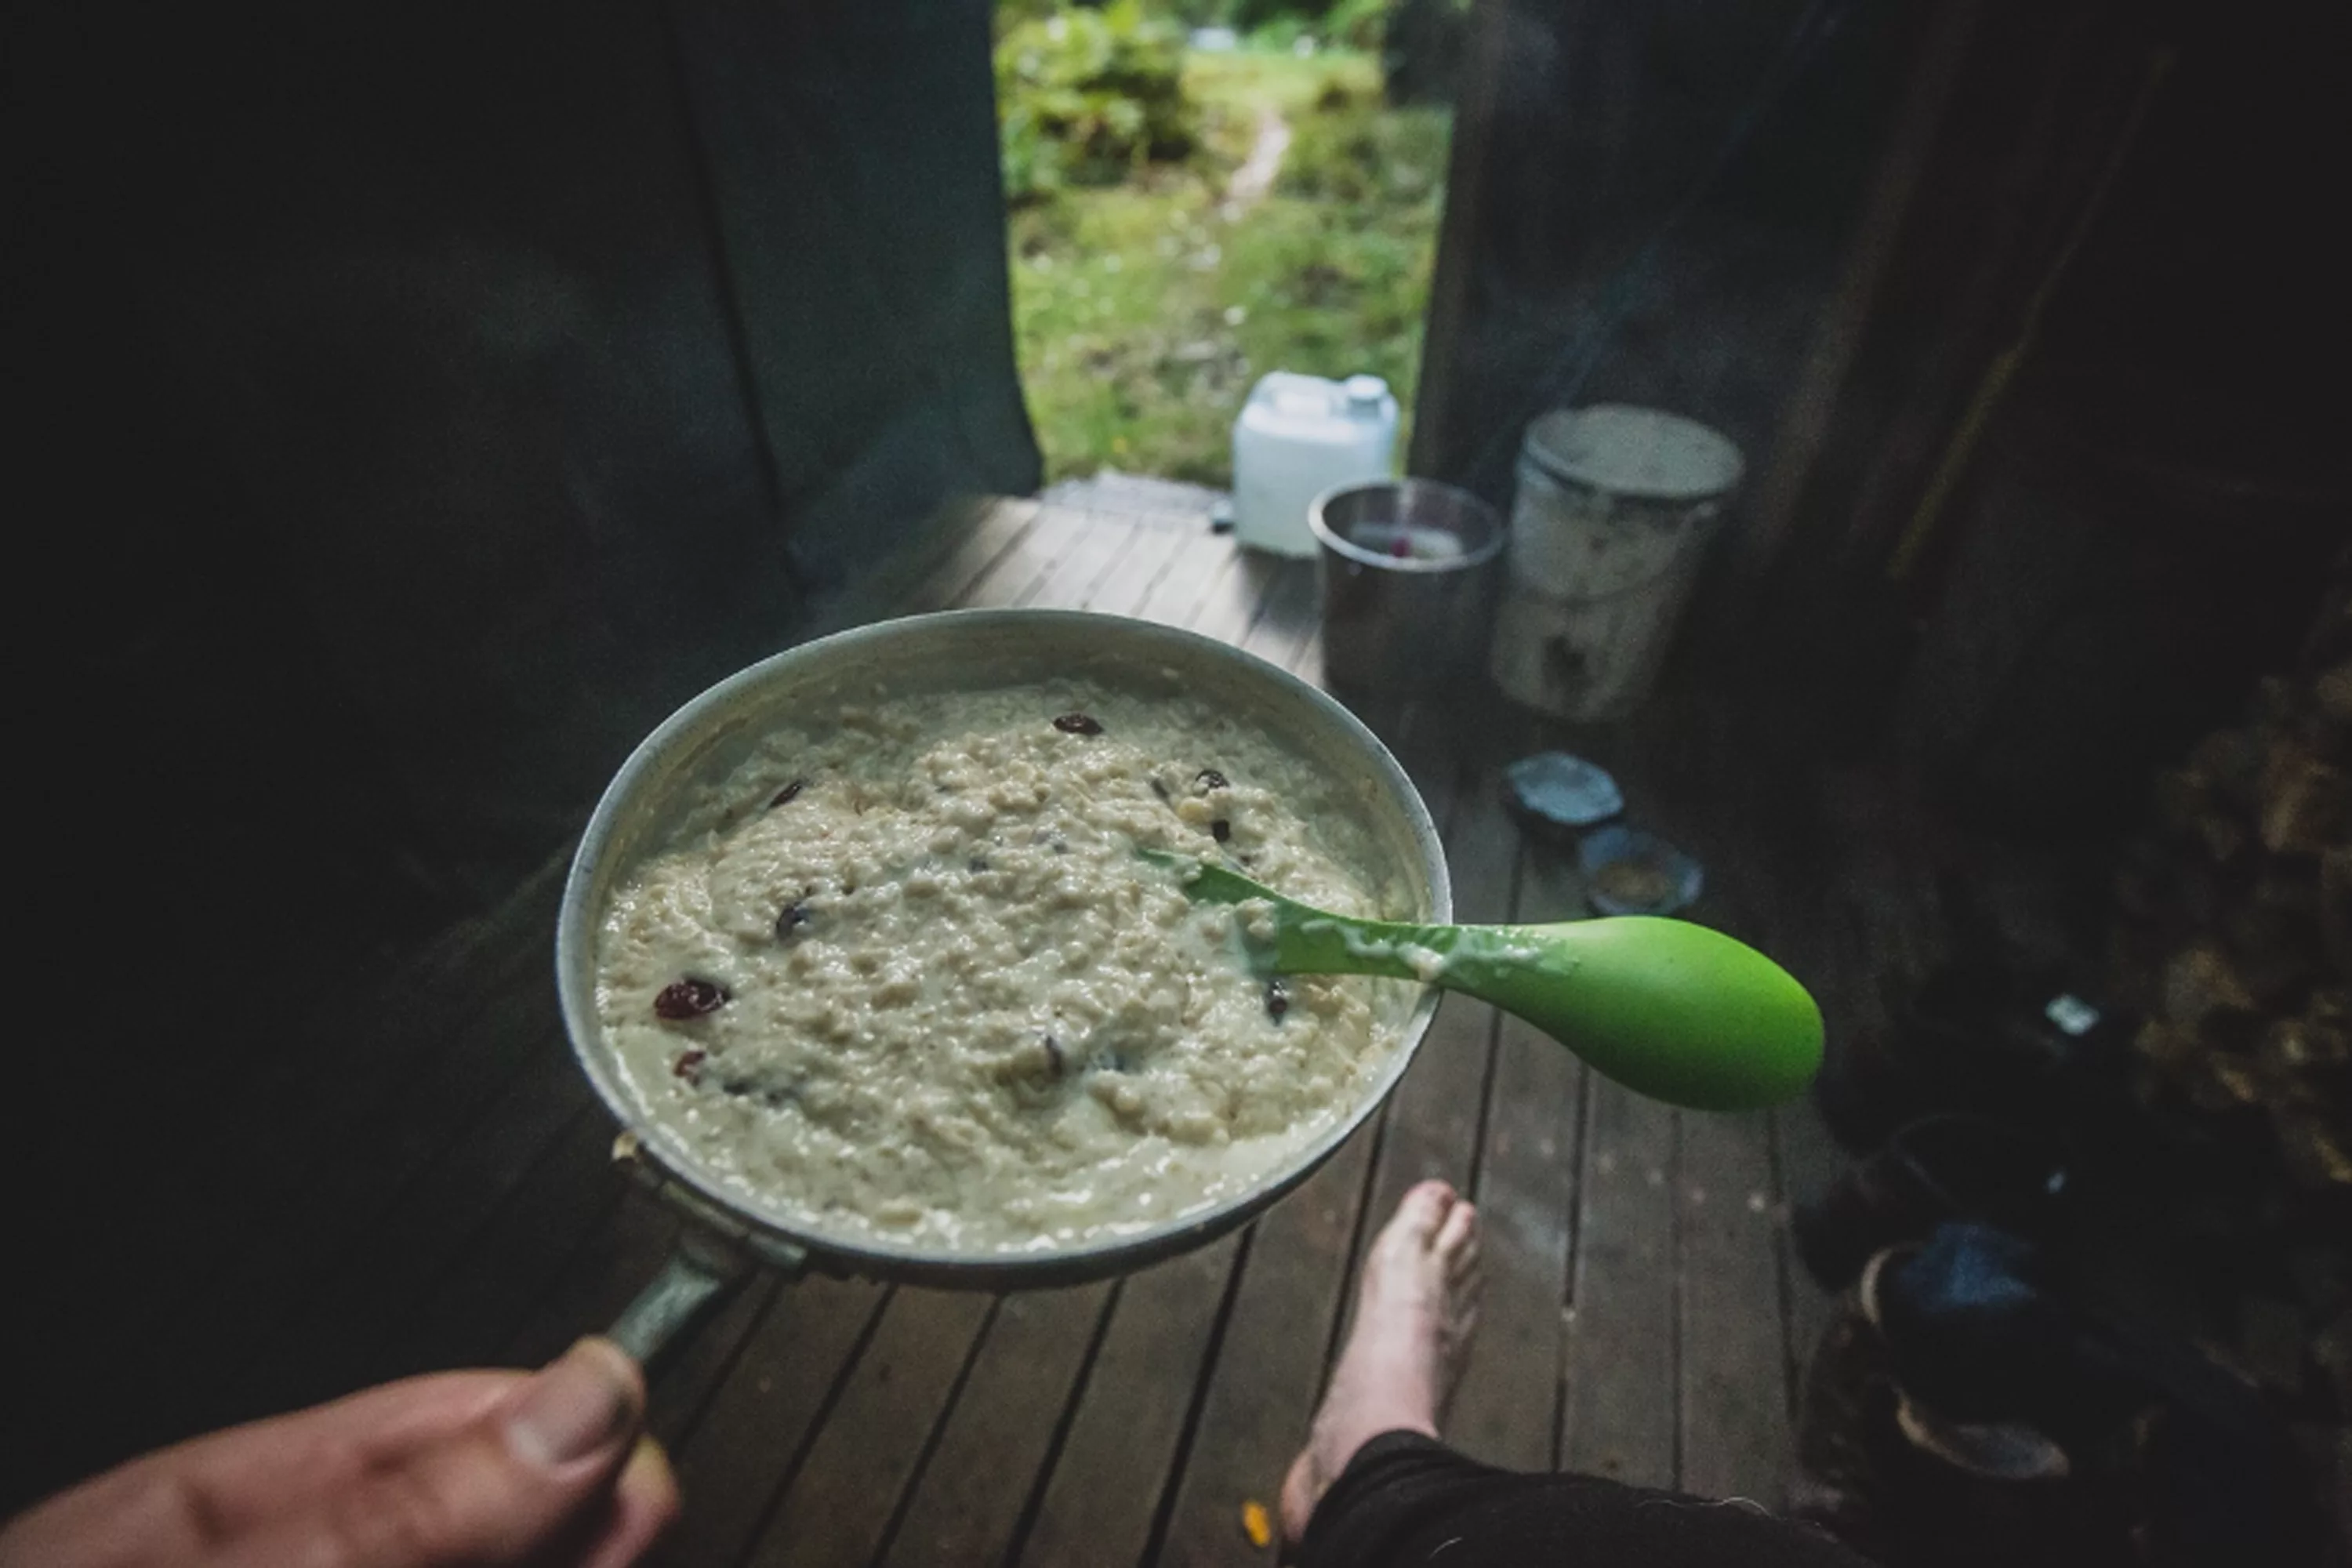 Backcountry Cuisine in a hut